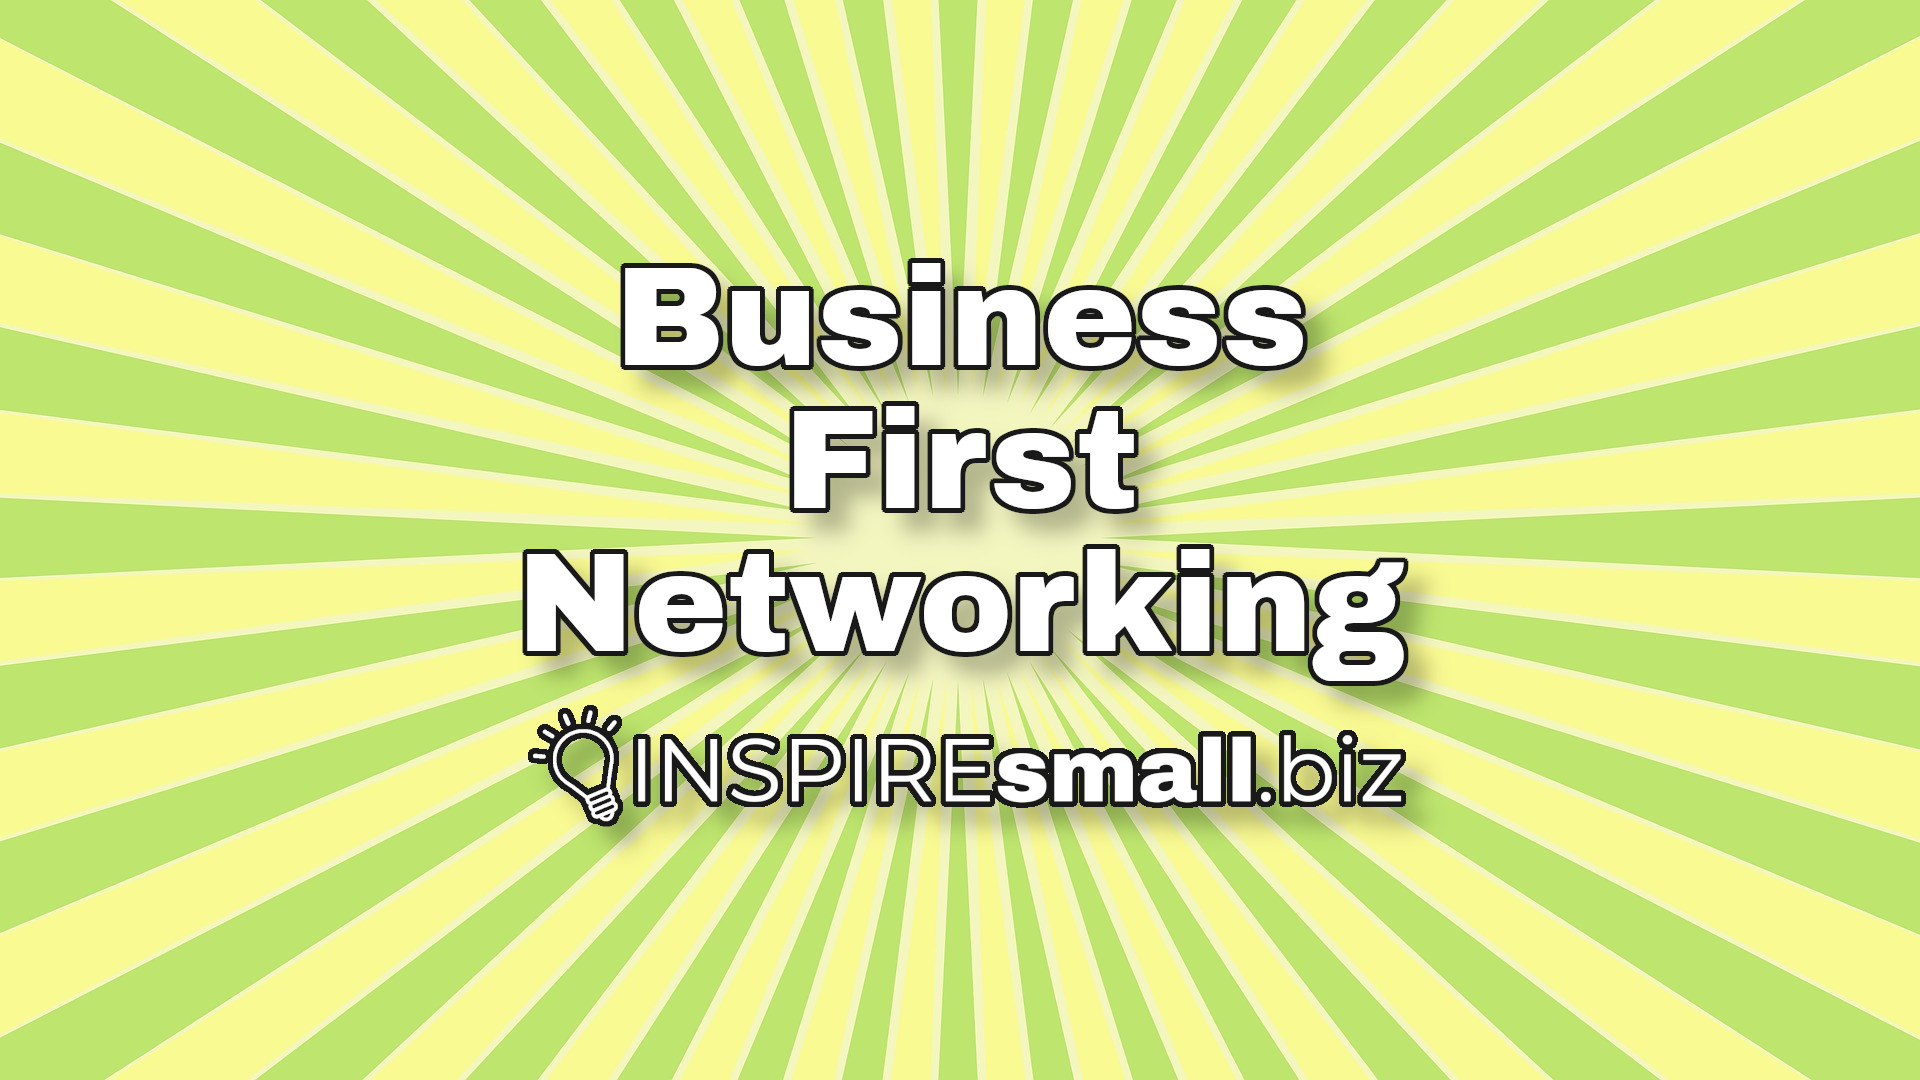 Business First Networking, hosted by INSPIREsmall.biz